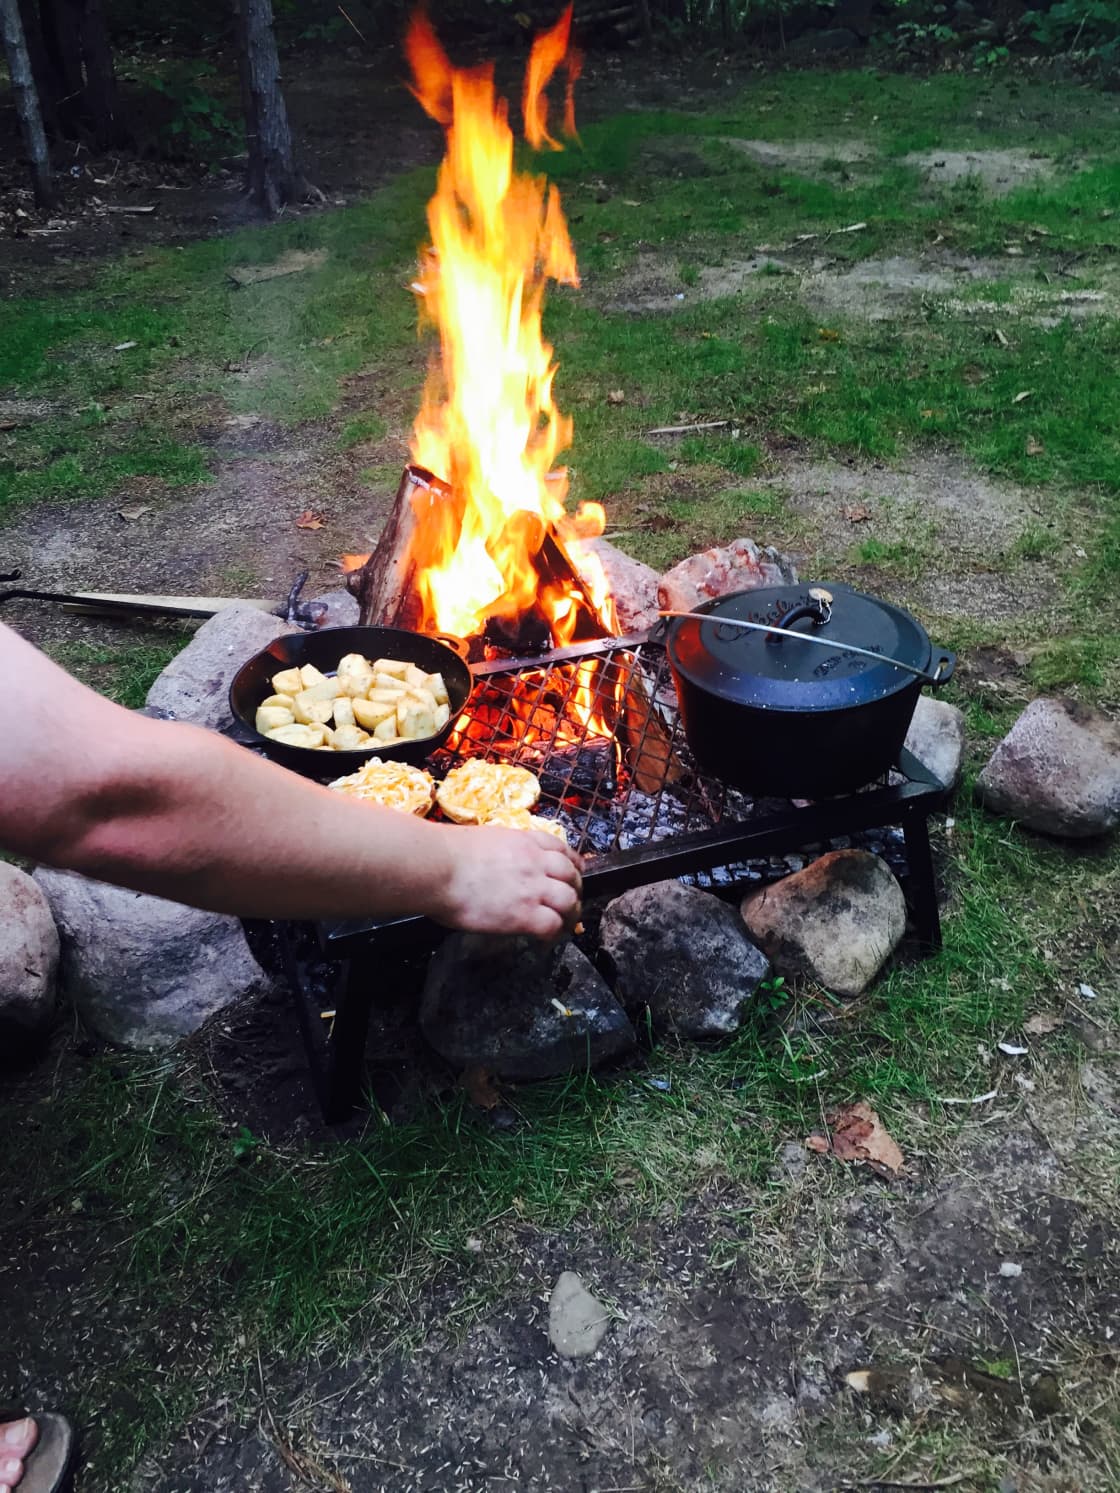 Cook over the fire on grill or cast iron cookware